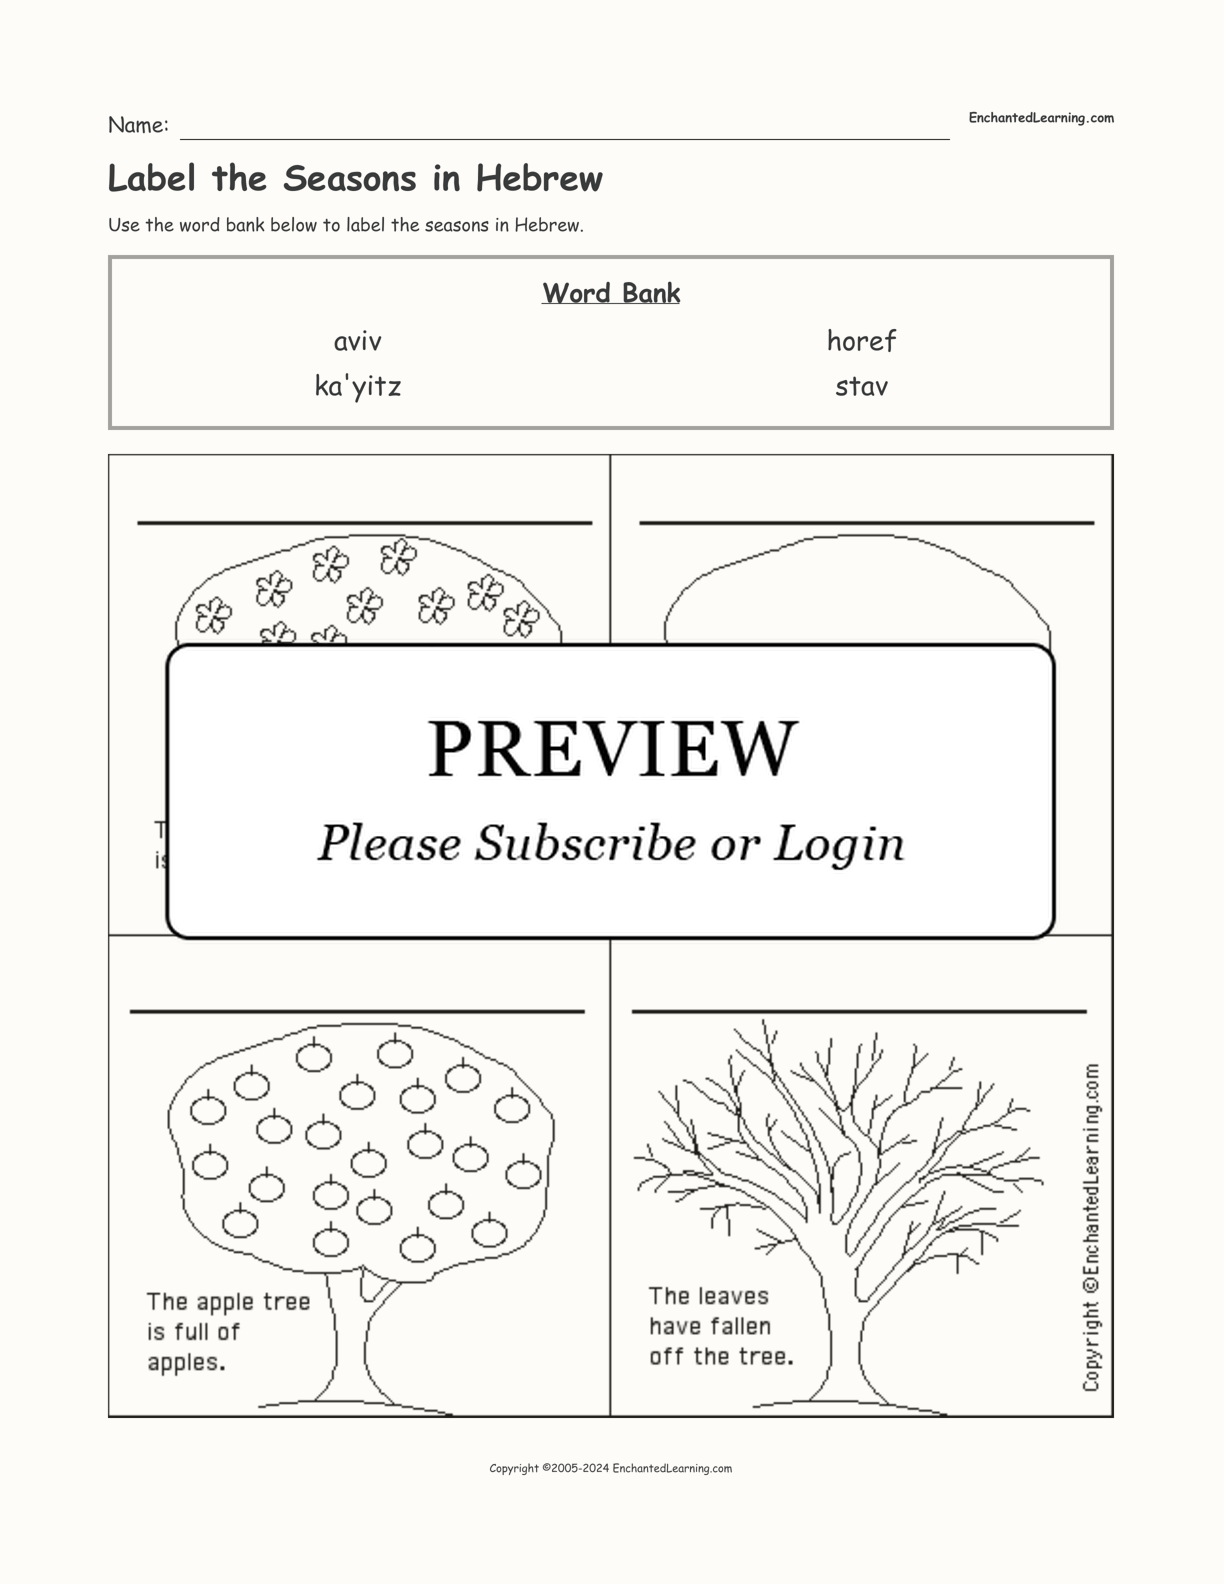 Label the Seasons in Hebrew interactive worksheet page 1